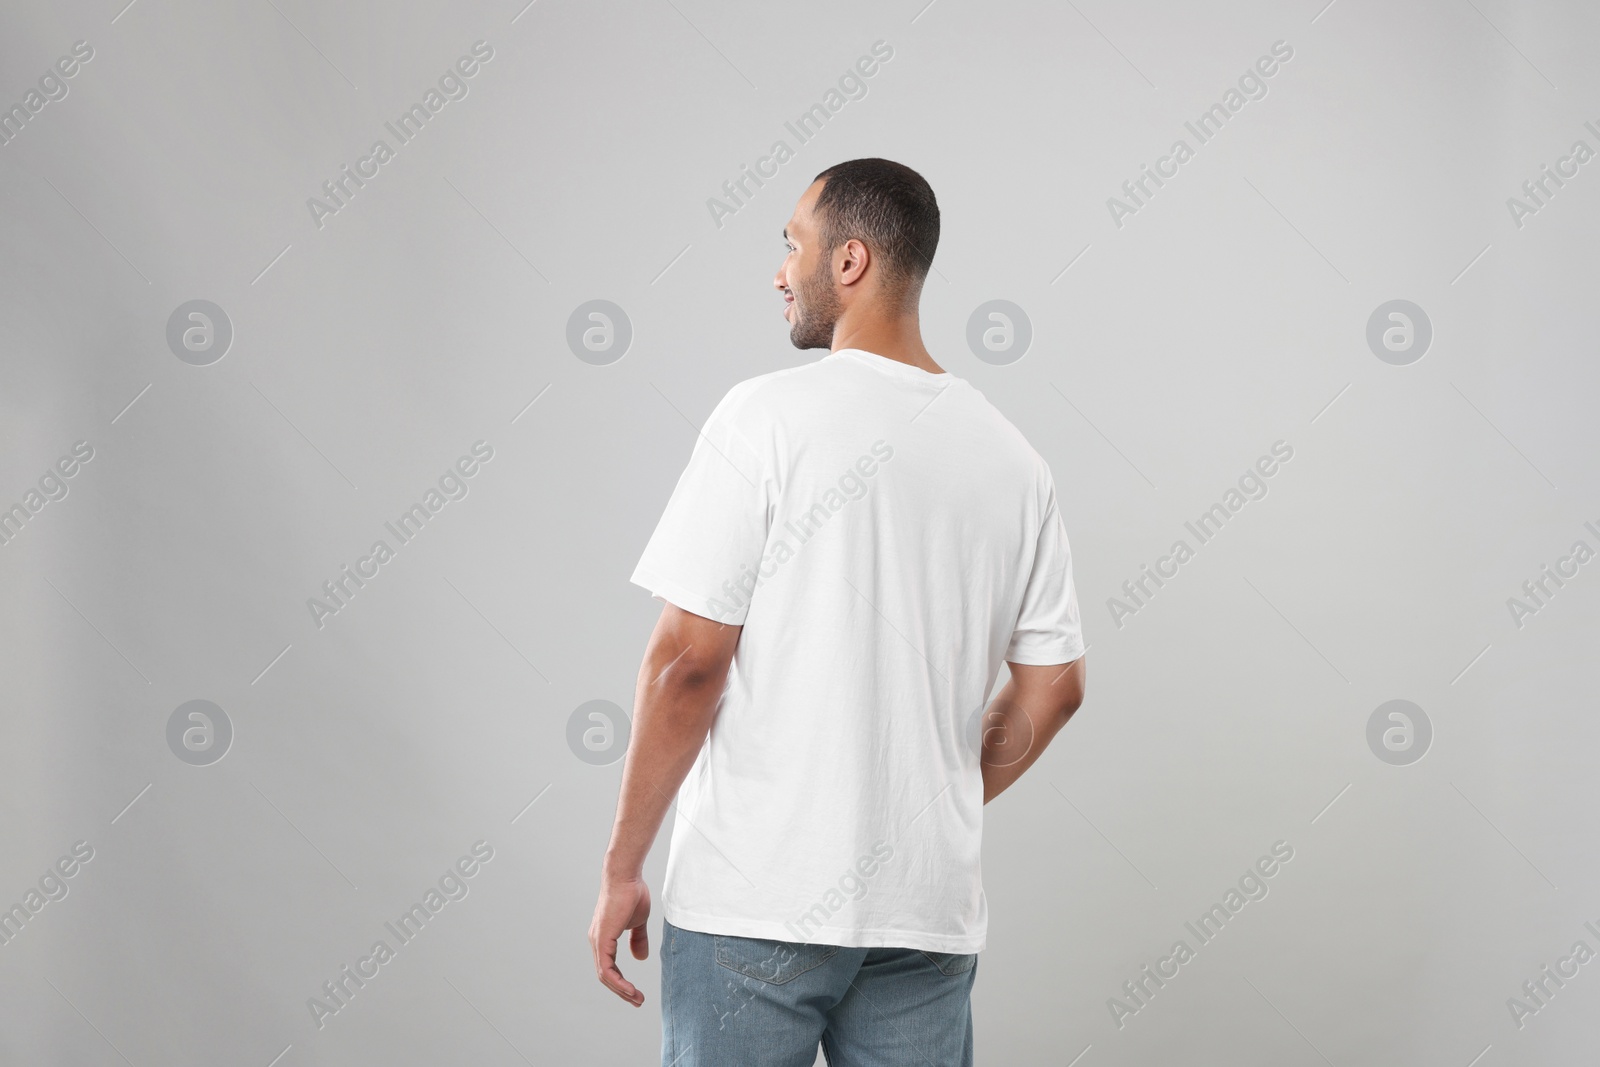 Photo of Man wearing white t-shirt on gray background, back view